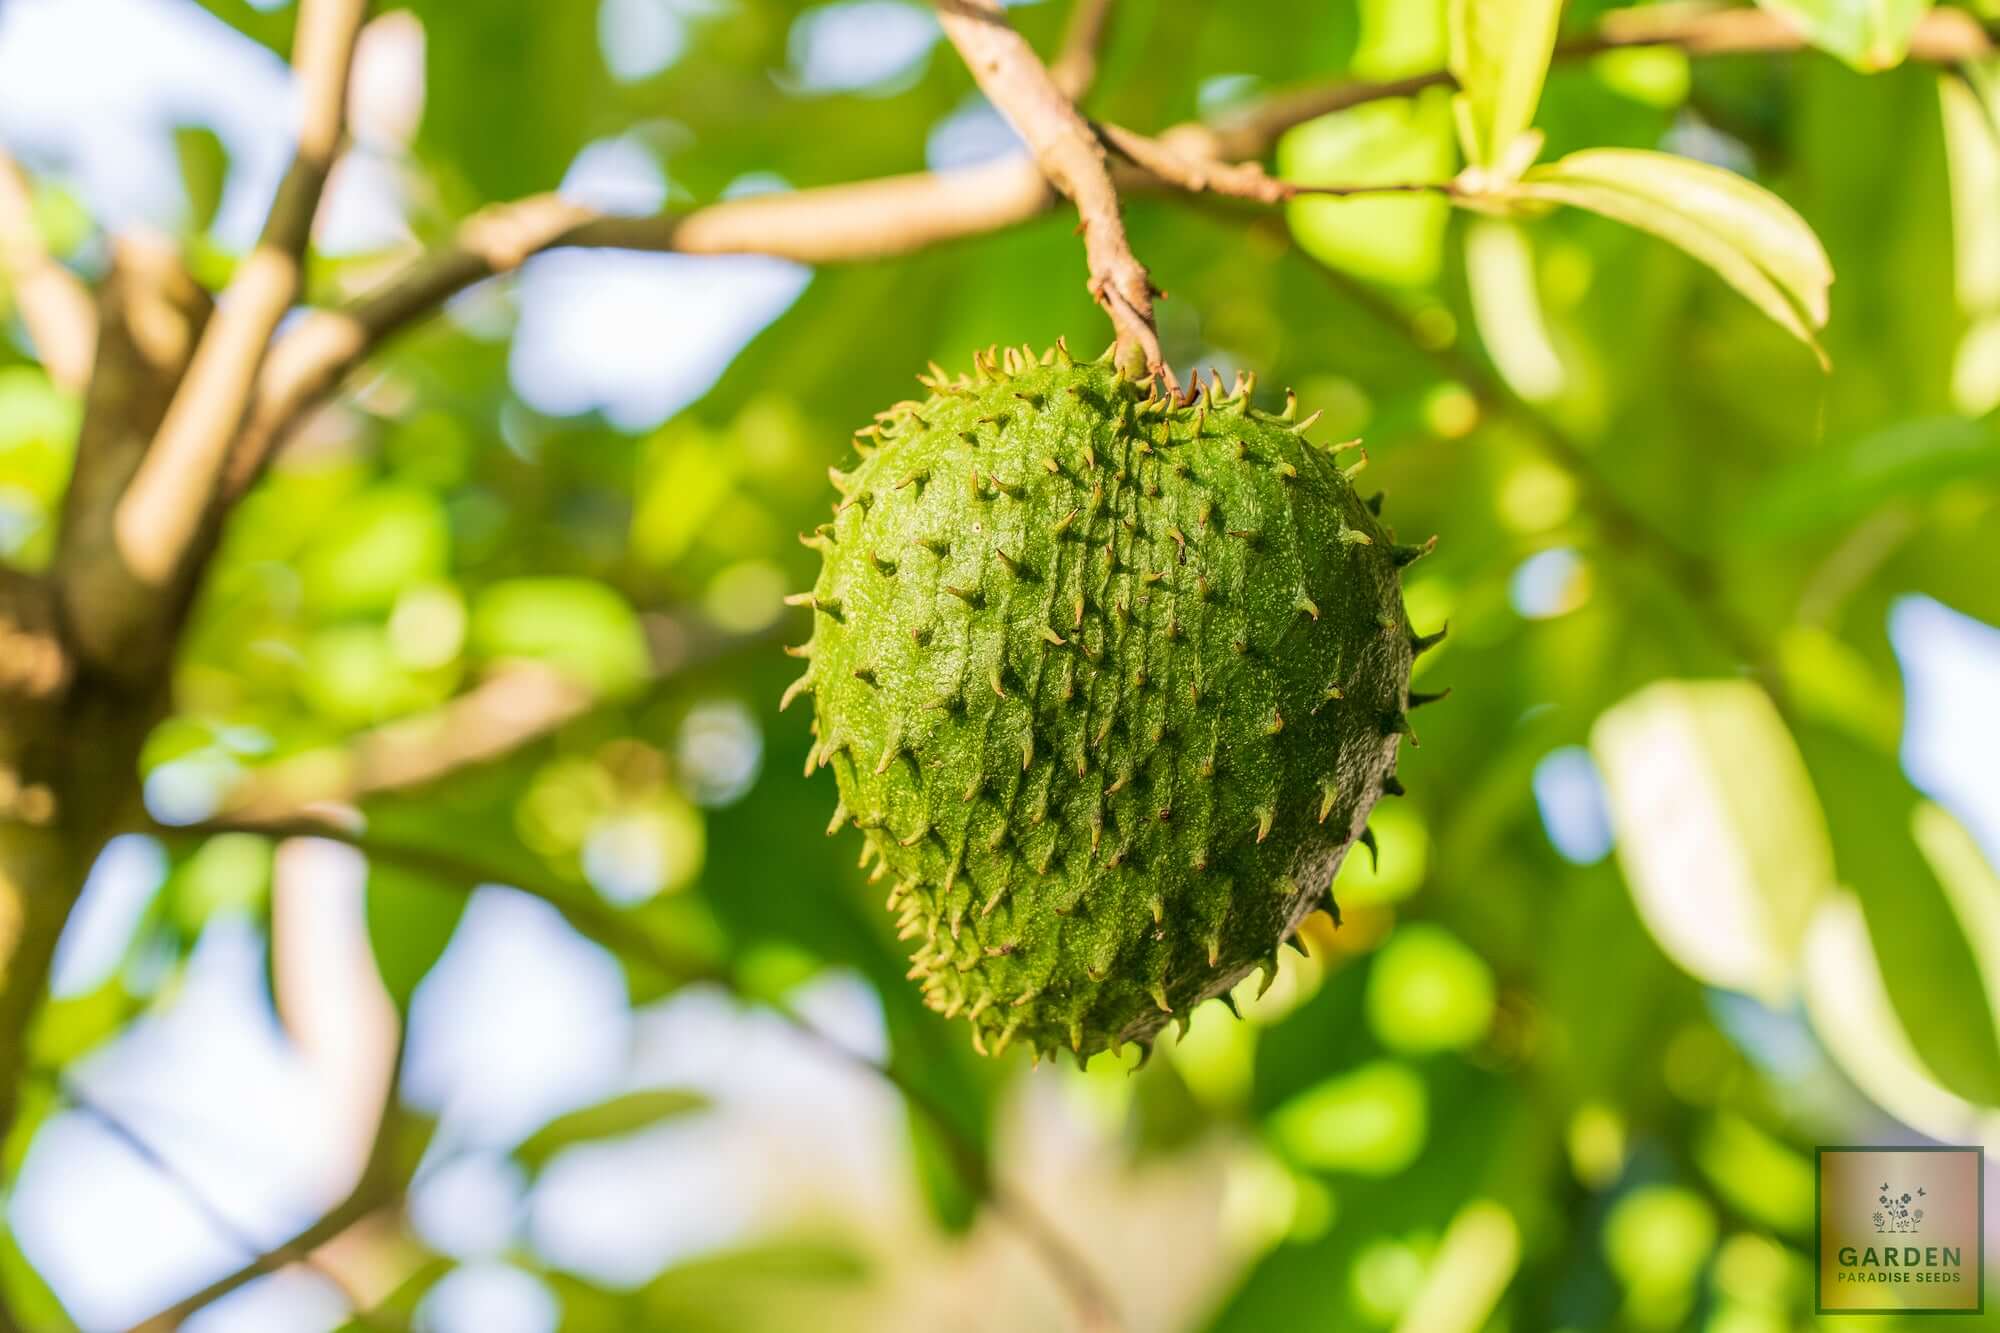 Tropical Fruit Bliss: Buy Guanabana Soursop for Exquisite Flavors